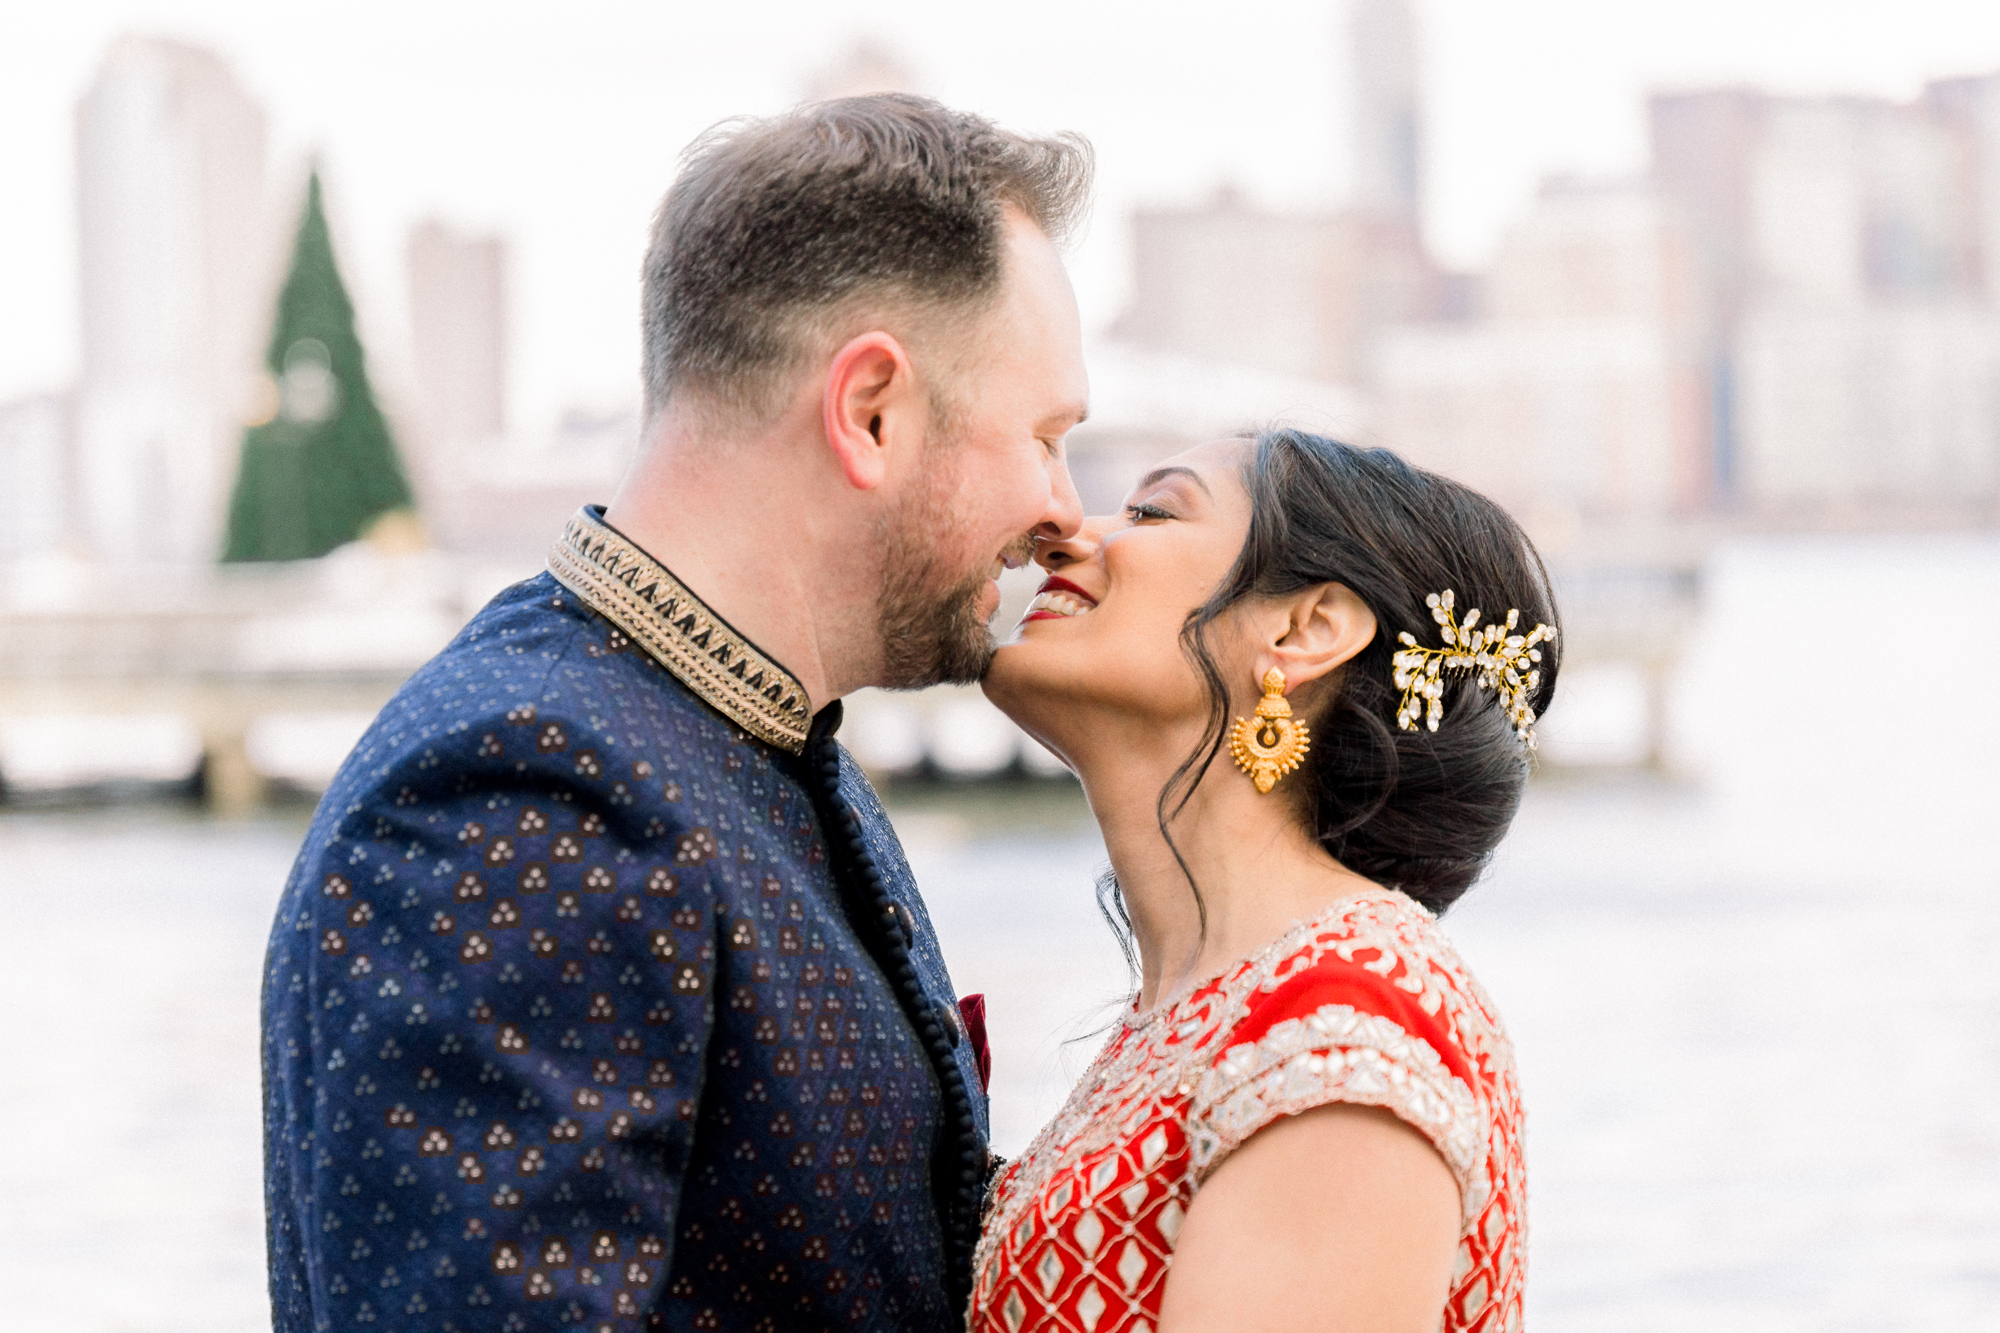 Cozy NJ winter wedding indoors at the Rooftop at Exchange Place